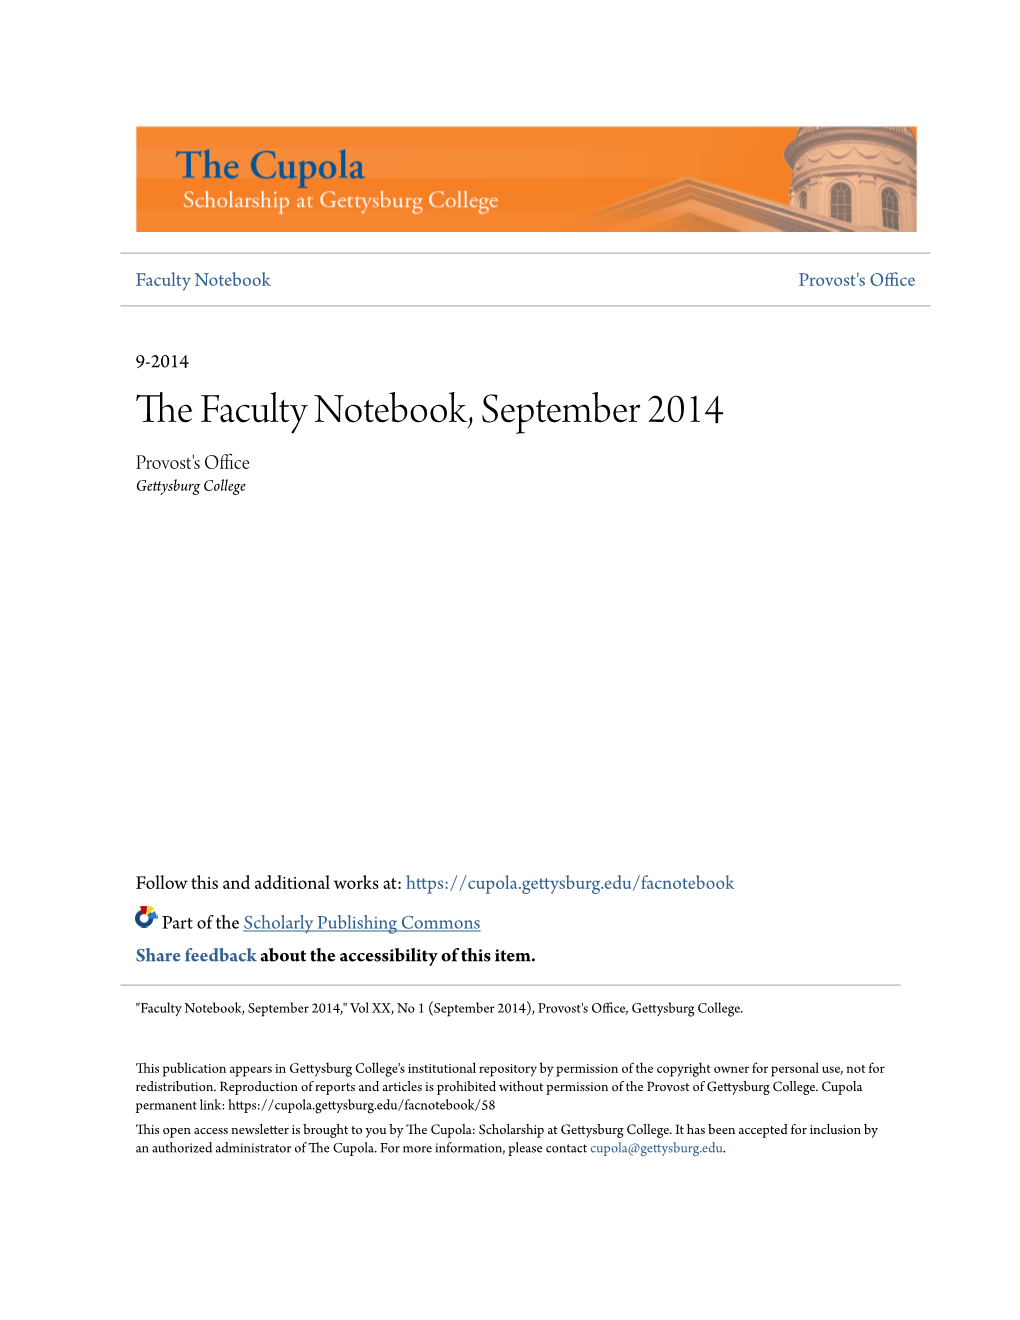 The Faculty Notebook, September 2014